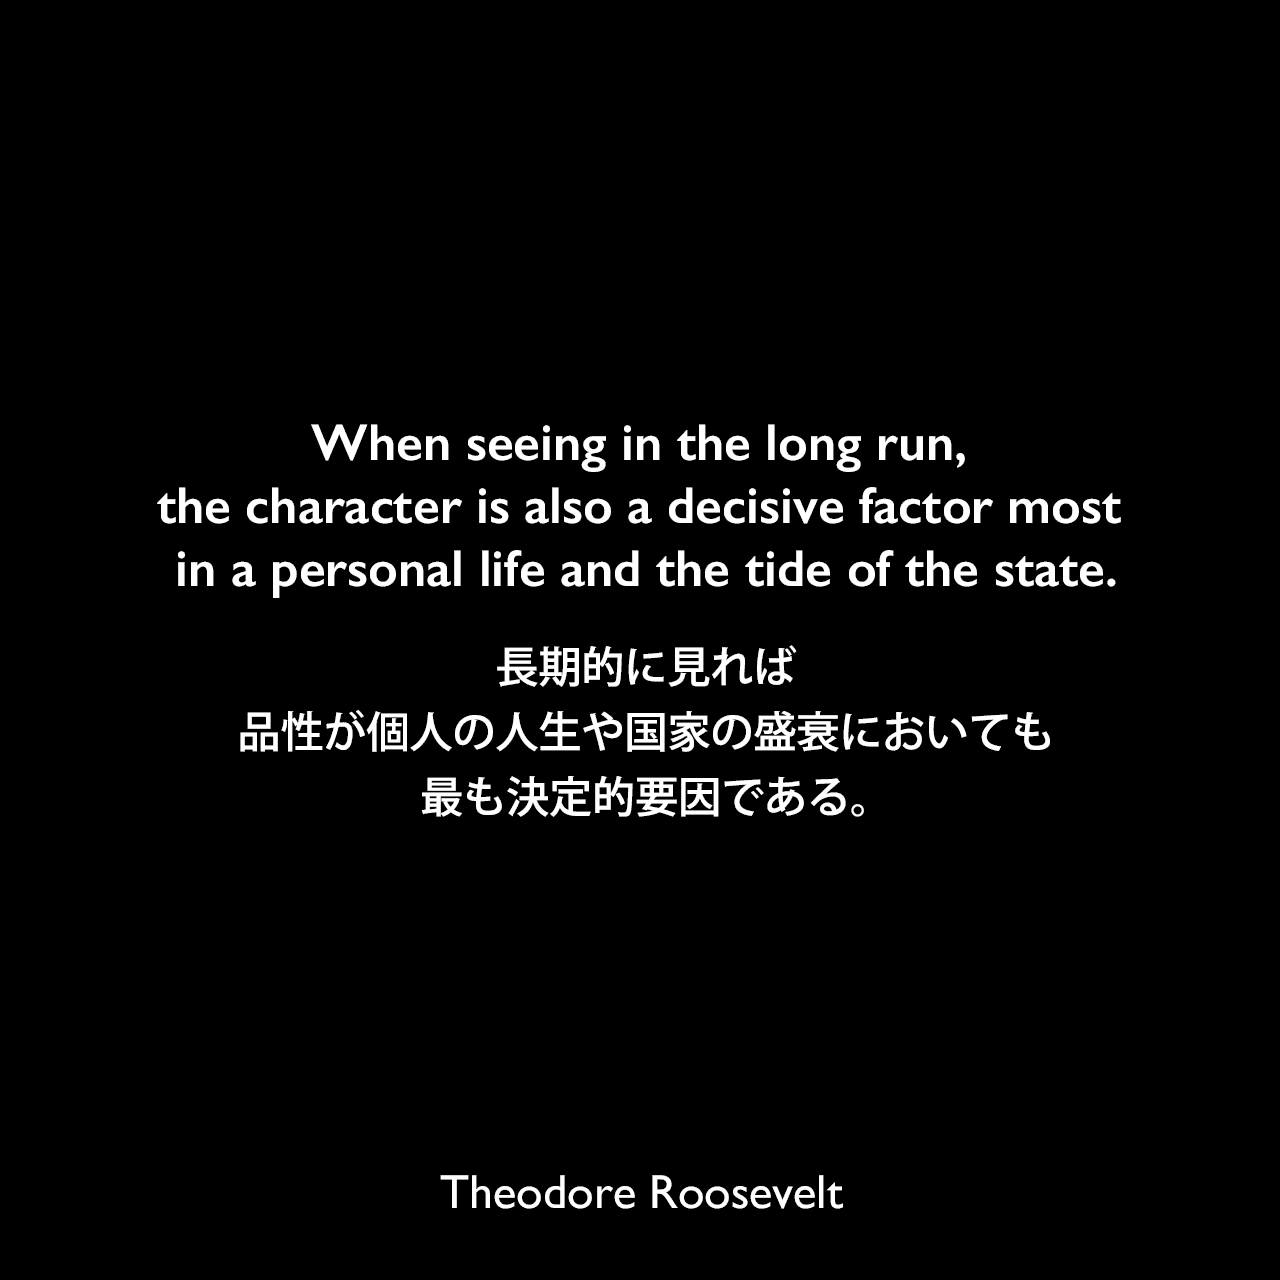 When seeing in the long run, the character is also a decisive factor most in a personal life and the tide of the state.長期的に見れば、品性が個人の人生や国家の盛衰においても、最も決定的要因である。Theodore Roosevelt